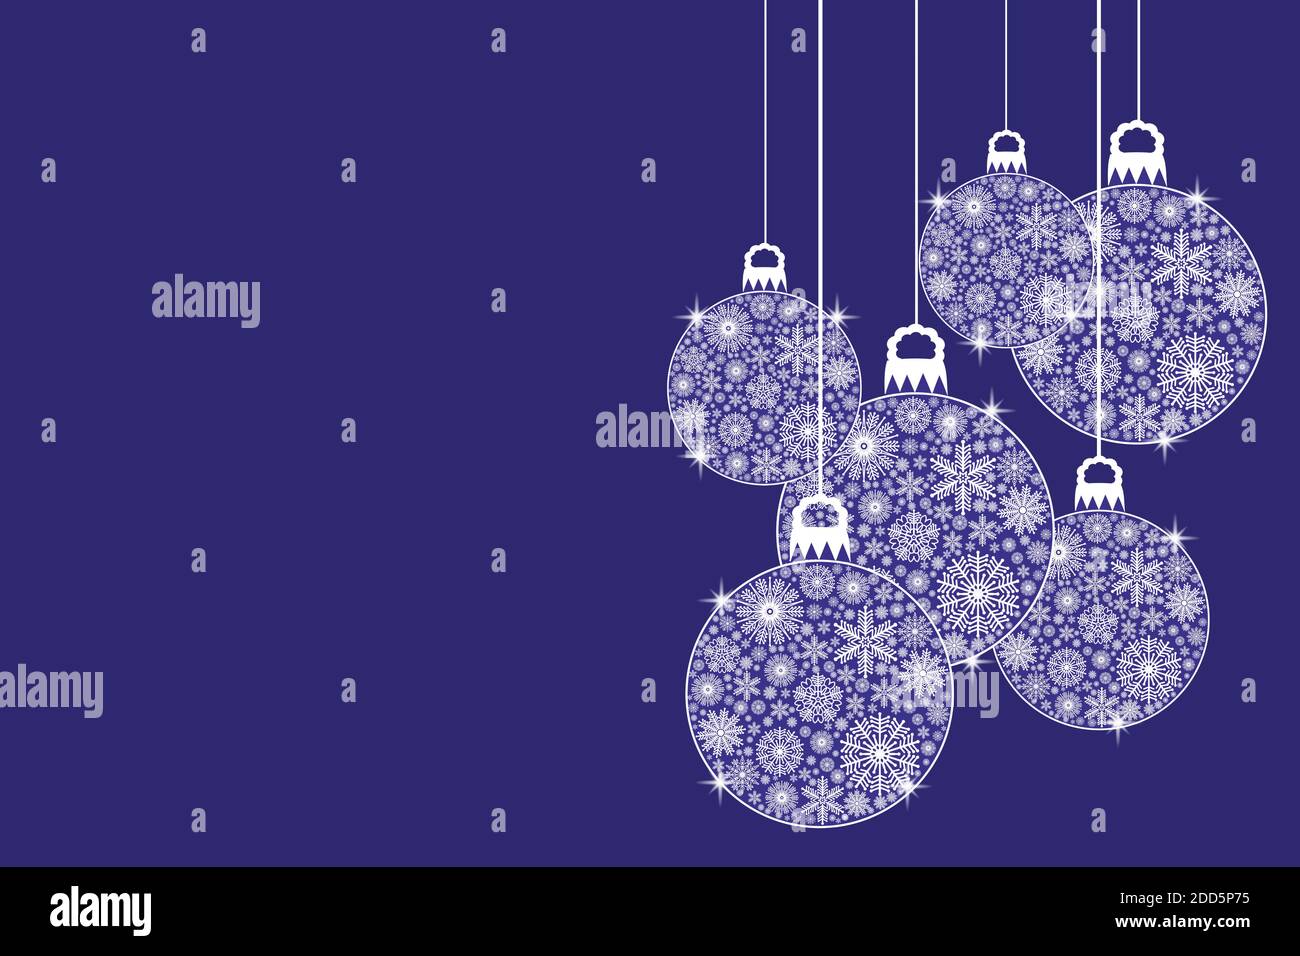 Illustration of hanging Christmas baubles covered in white snowflakes against a dark blue background with space for text. Stock Photo